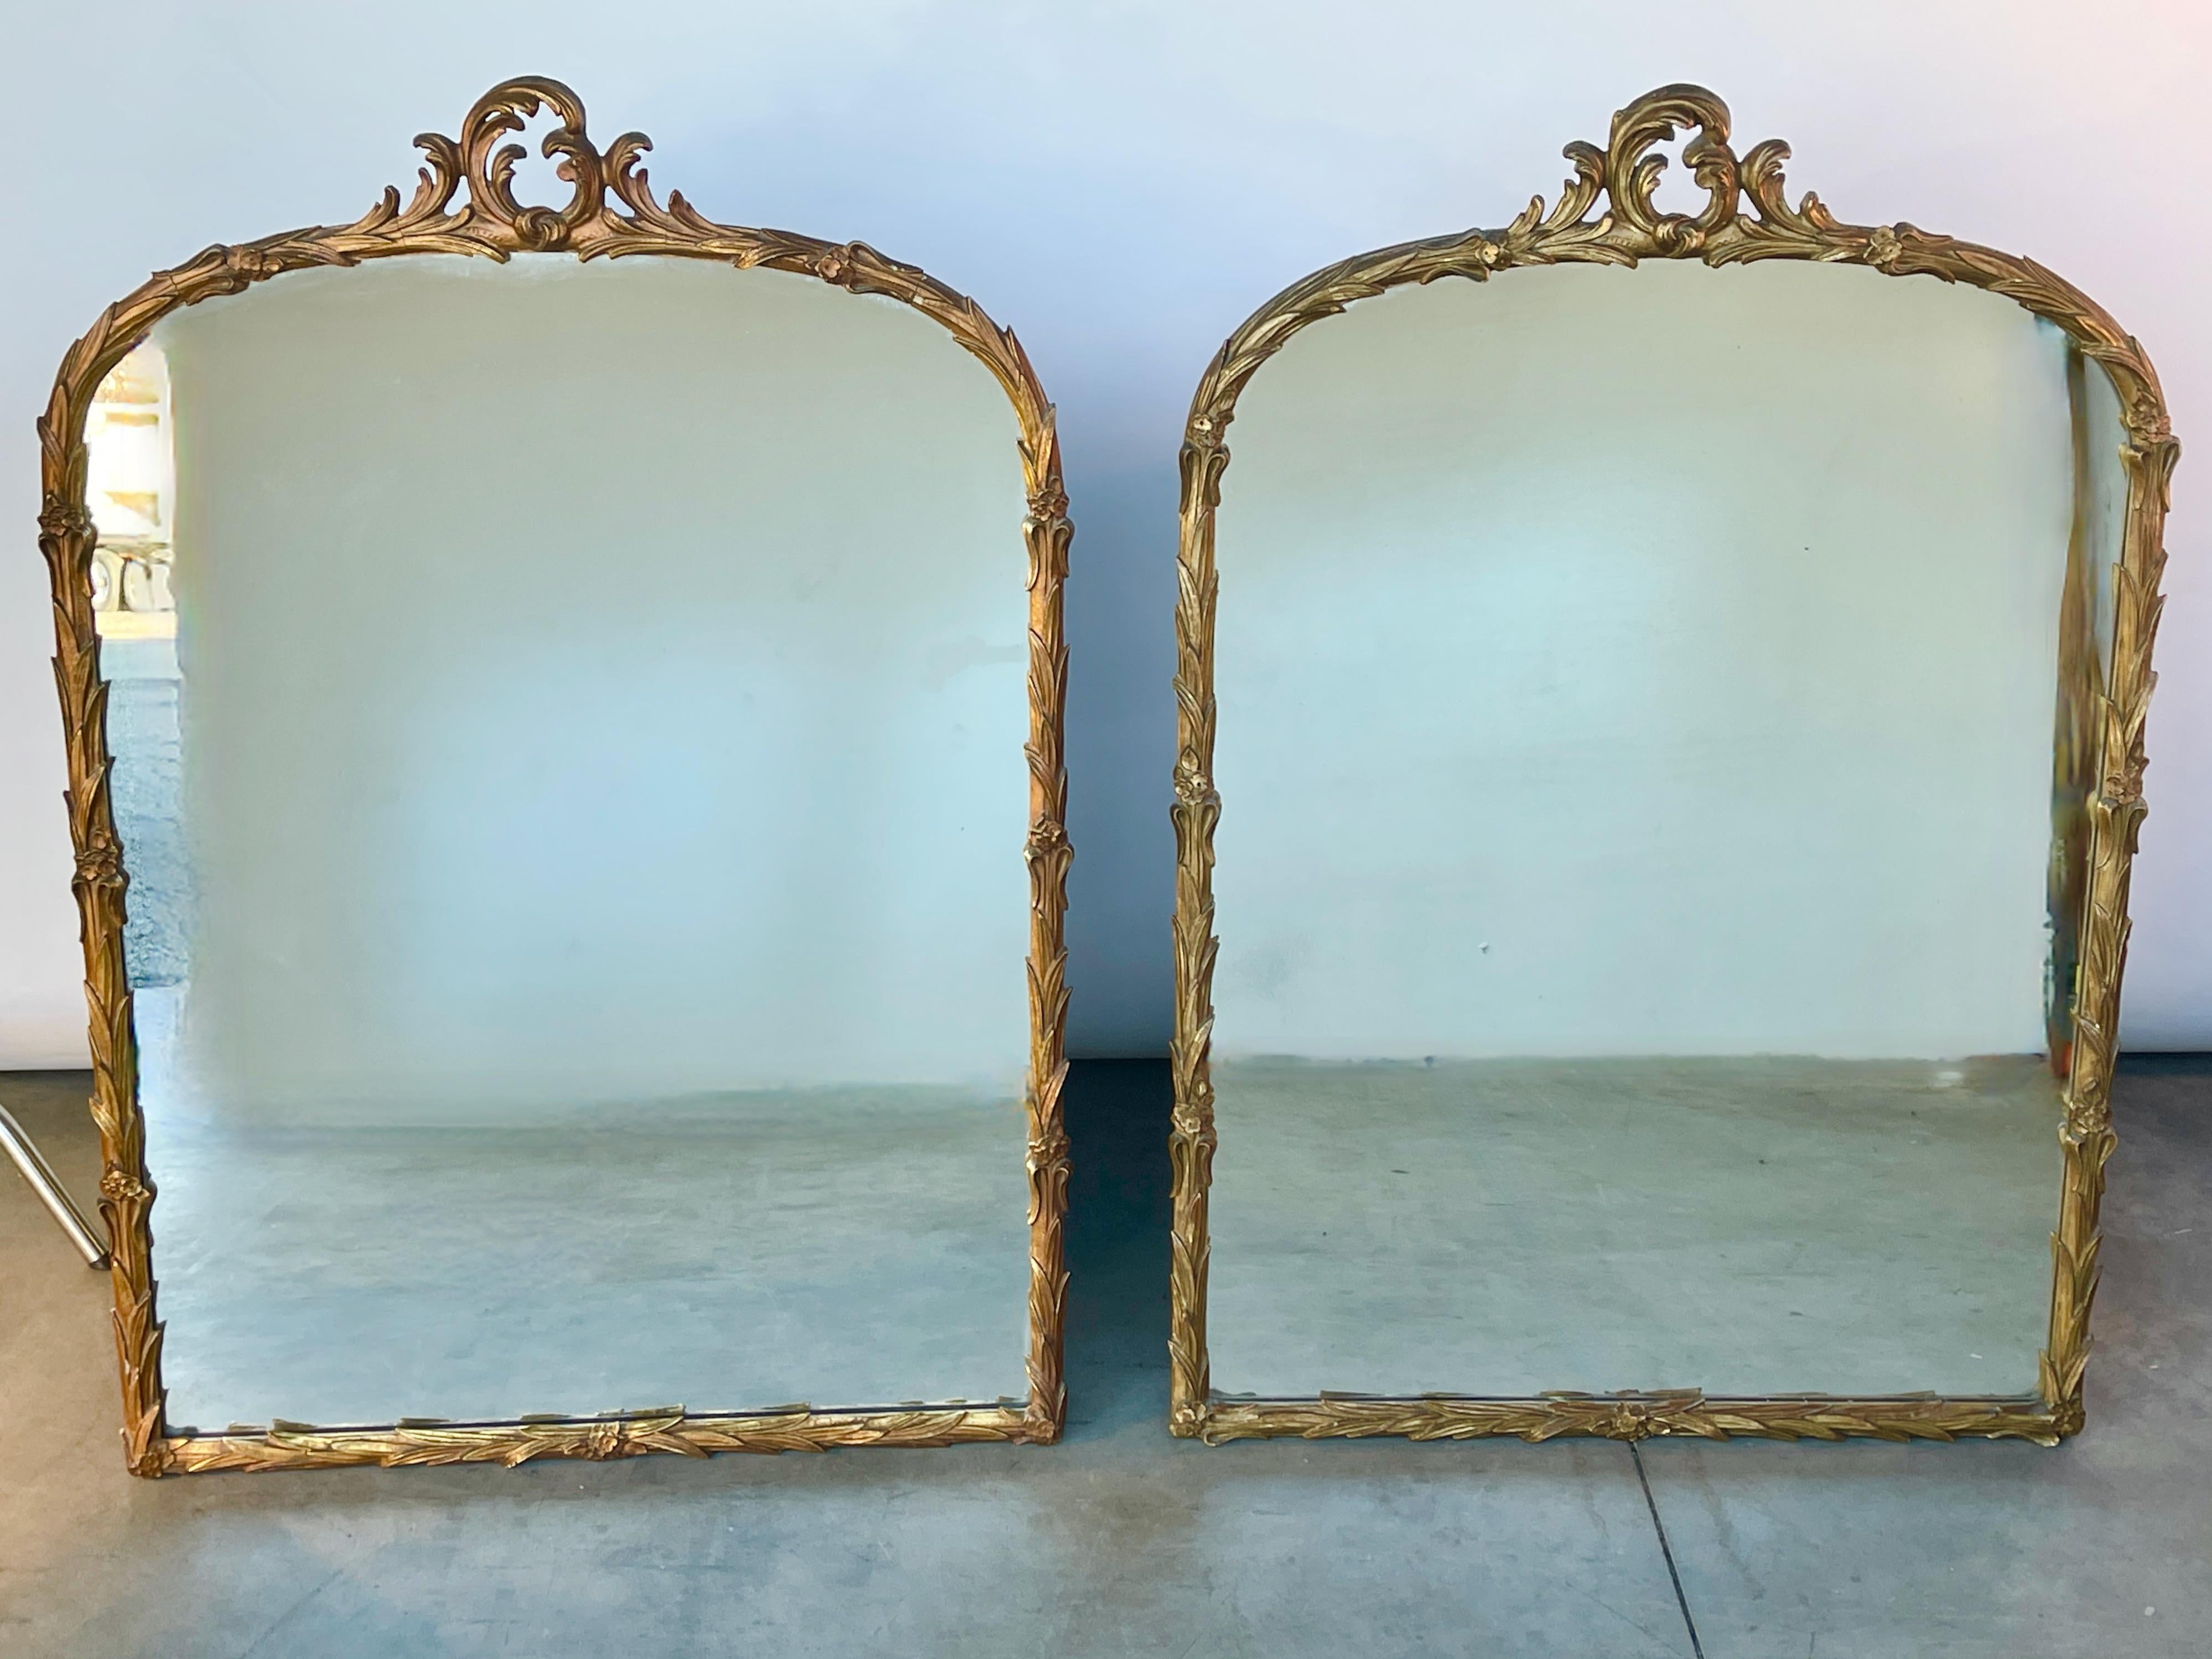 Pair of art deco wall mirrors by Grosfeld House circa 1939. 
Hand carved wood in a palm leaf design applied with gold leaf and gesso. 
Measures: 6 inches high to scrolled top by 32 inches wide.